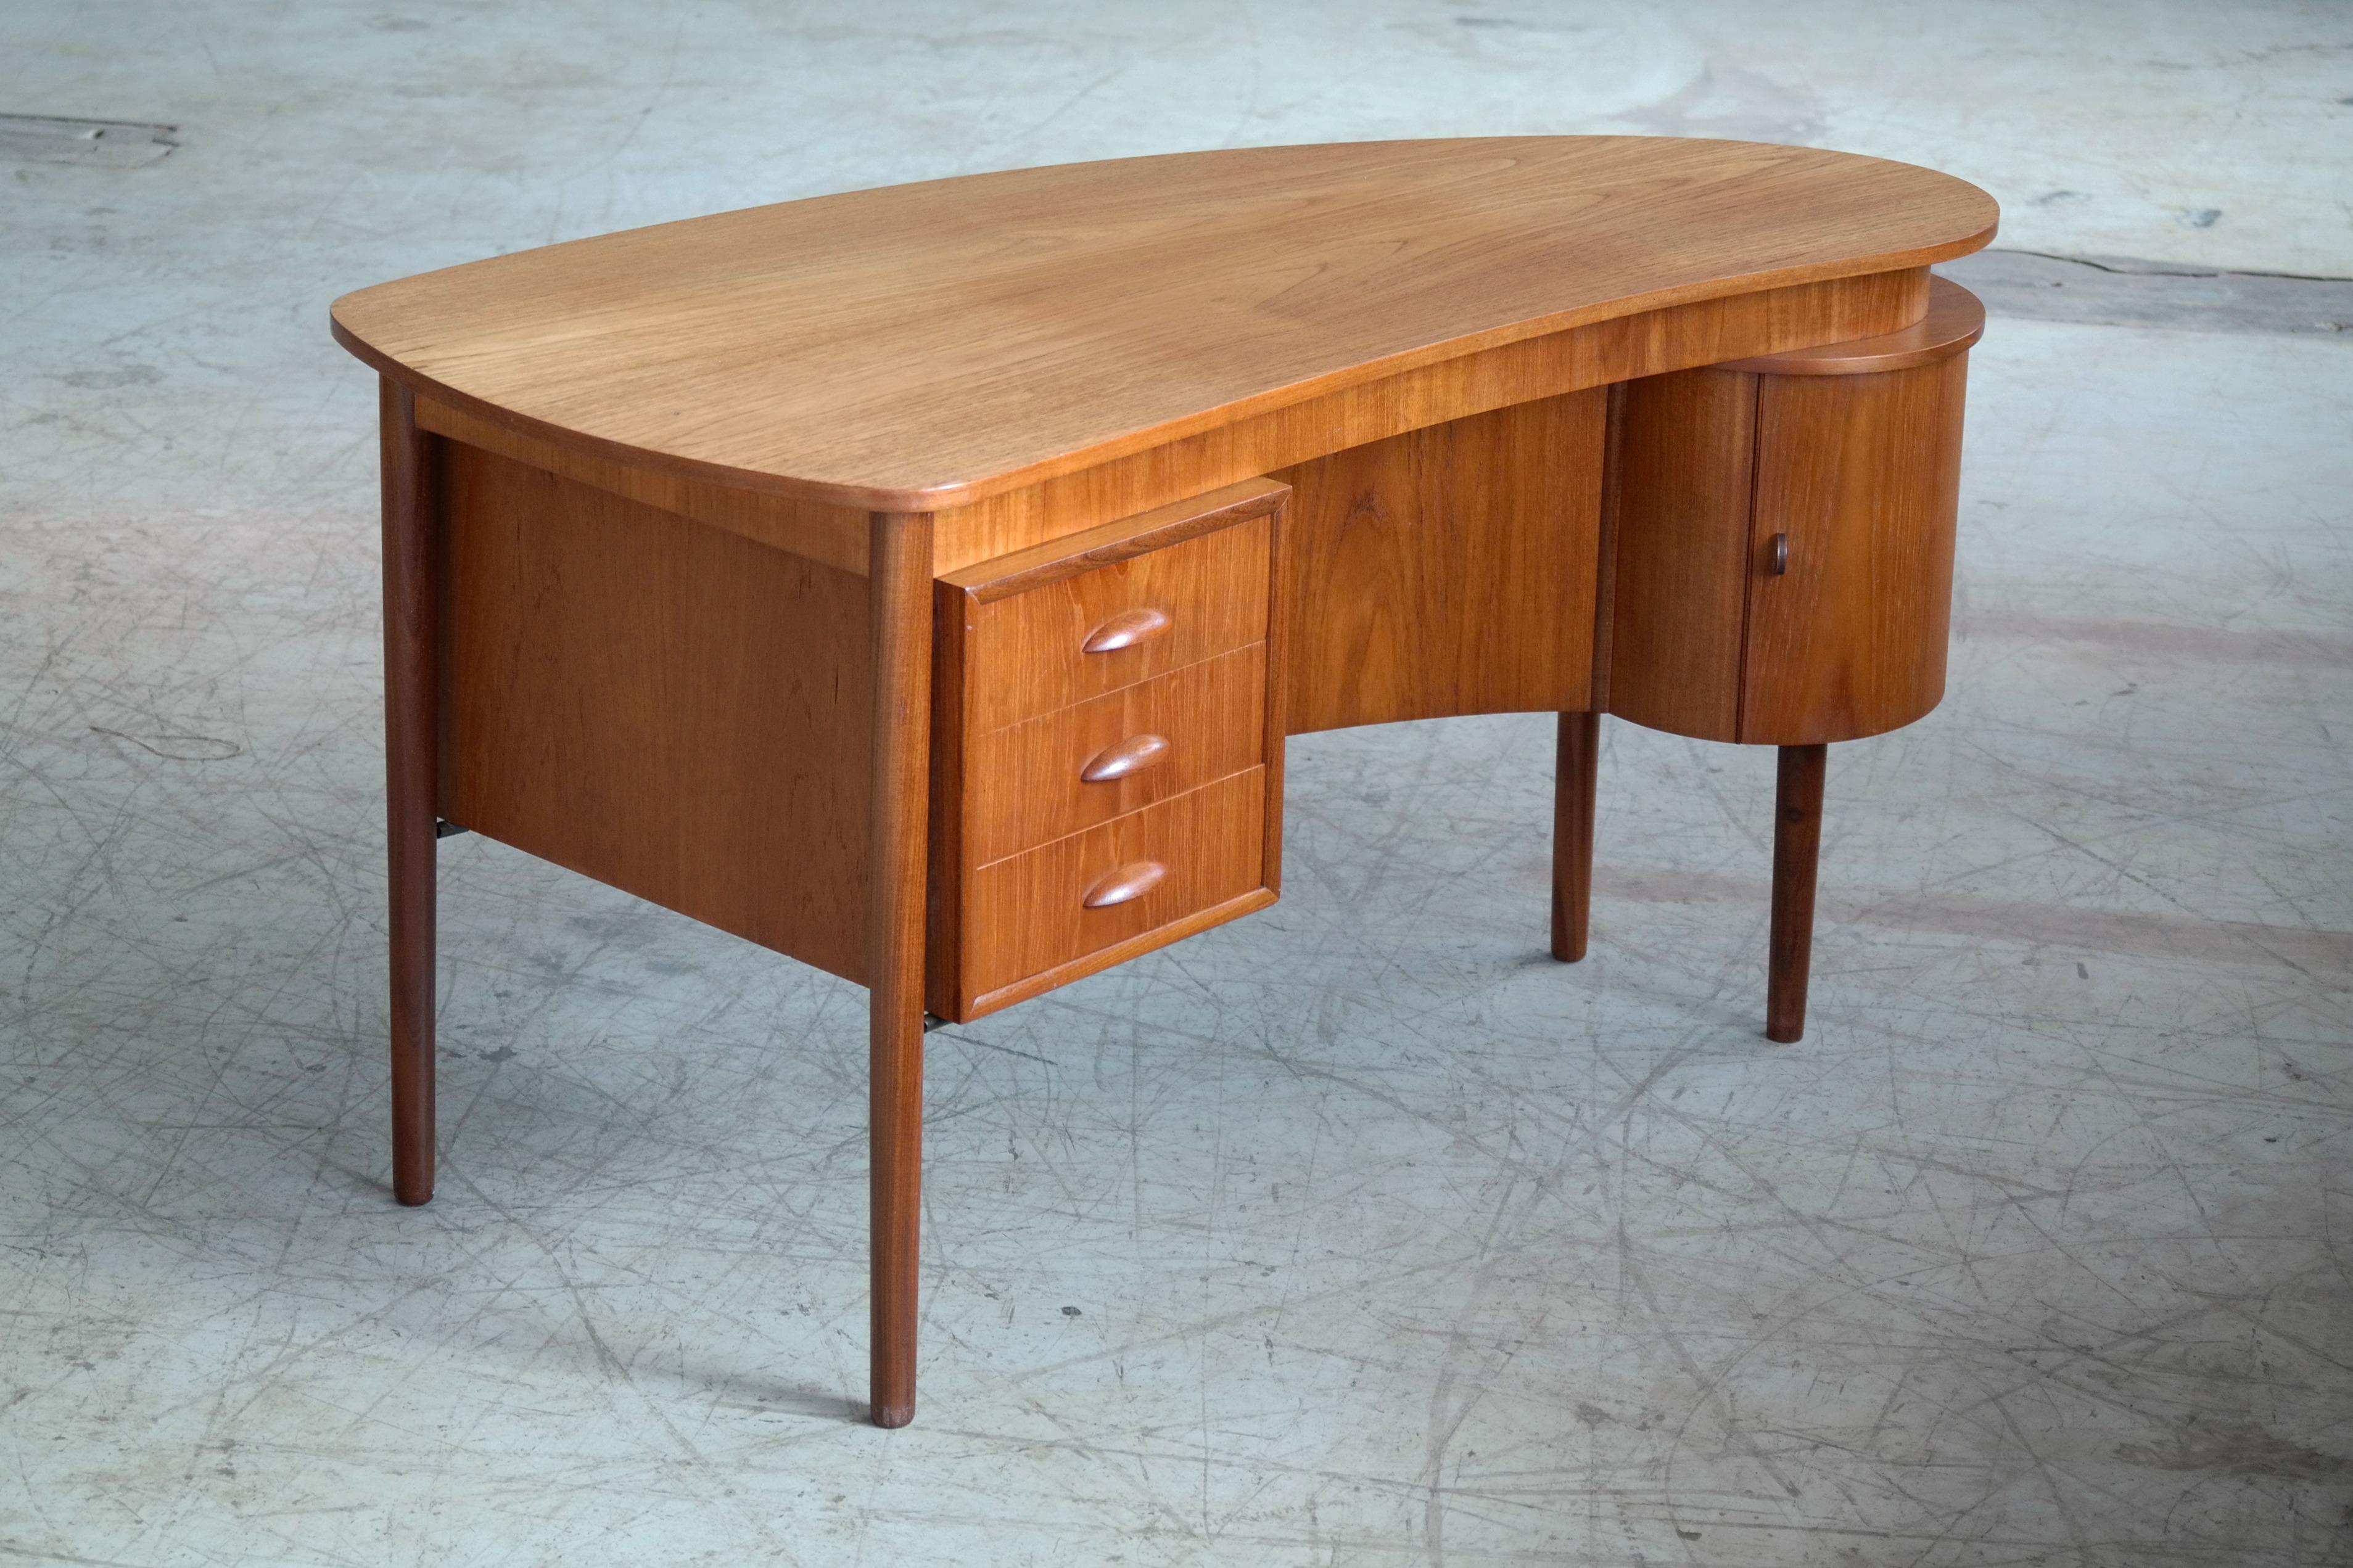 Beautiful Danish small executive desk in teak in the style Kai Kristiansen and made in Denmark in the early 1960s. Has the characteristic Kai Kristiansen very organic kidney-shaped design of the top and hand carved pulls. Due to its size it's very